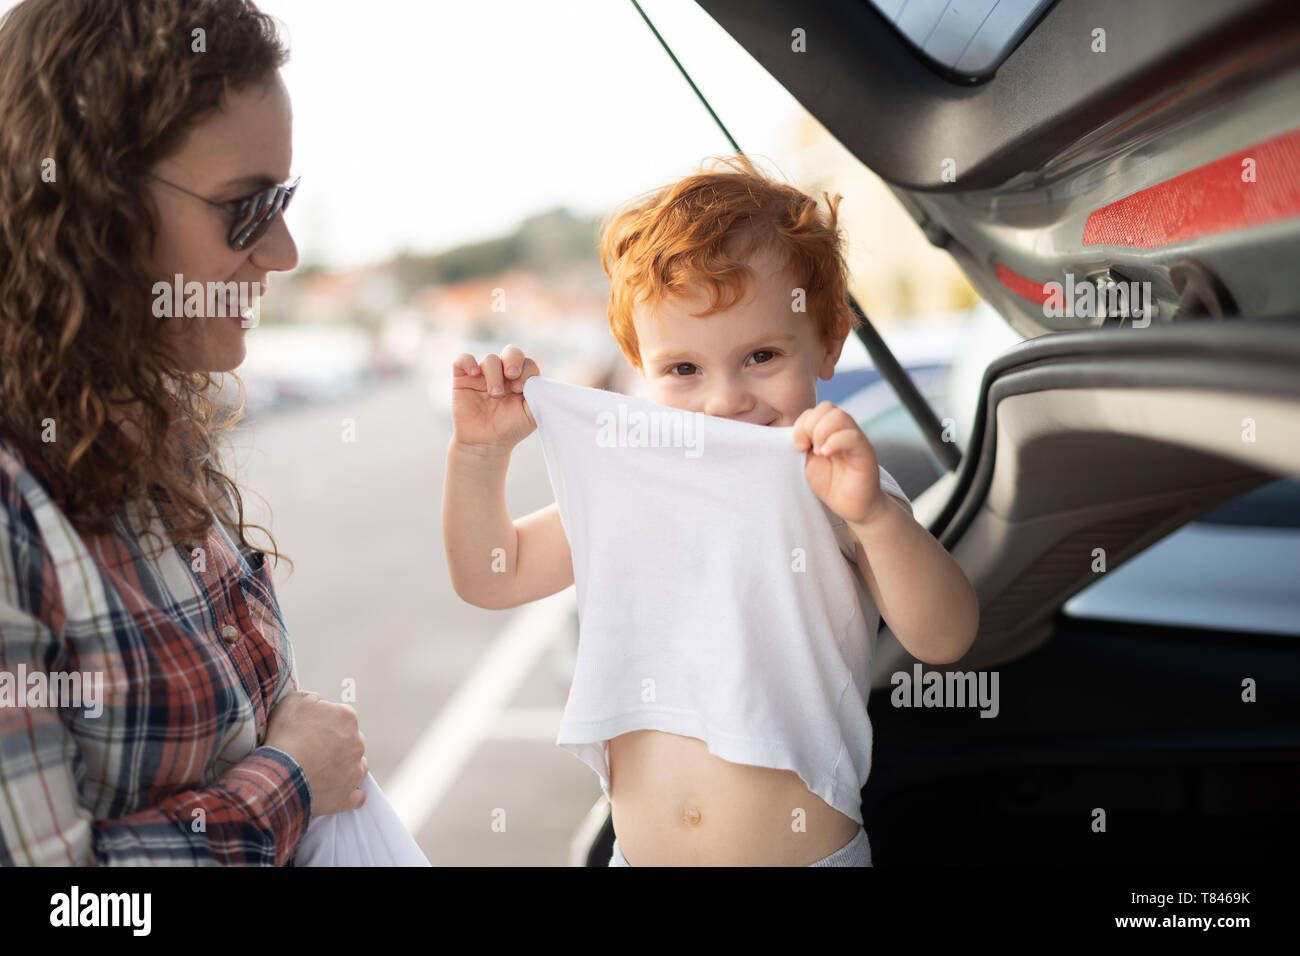 Boy getting fresh change of clothes at car boot Stock Photo